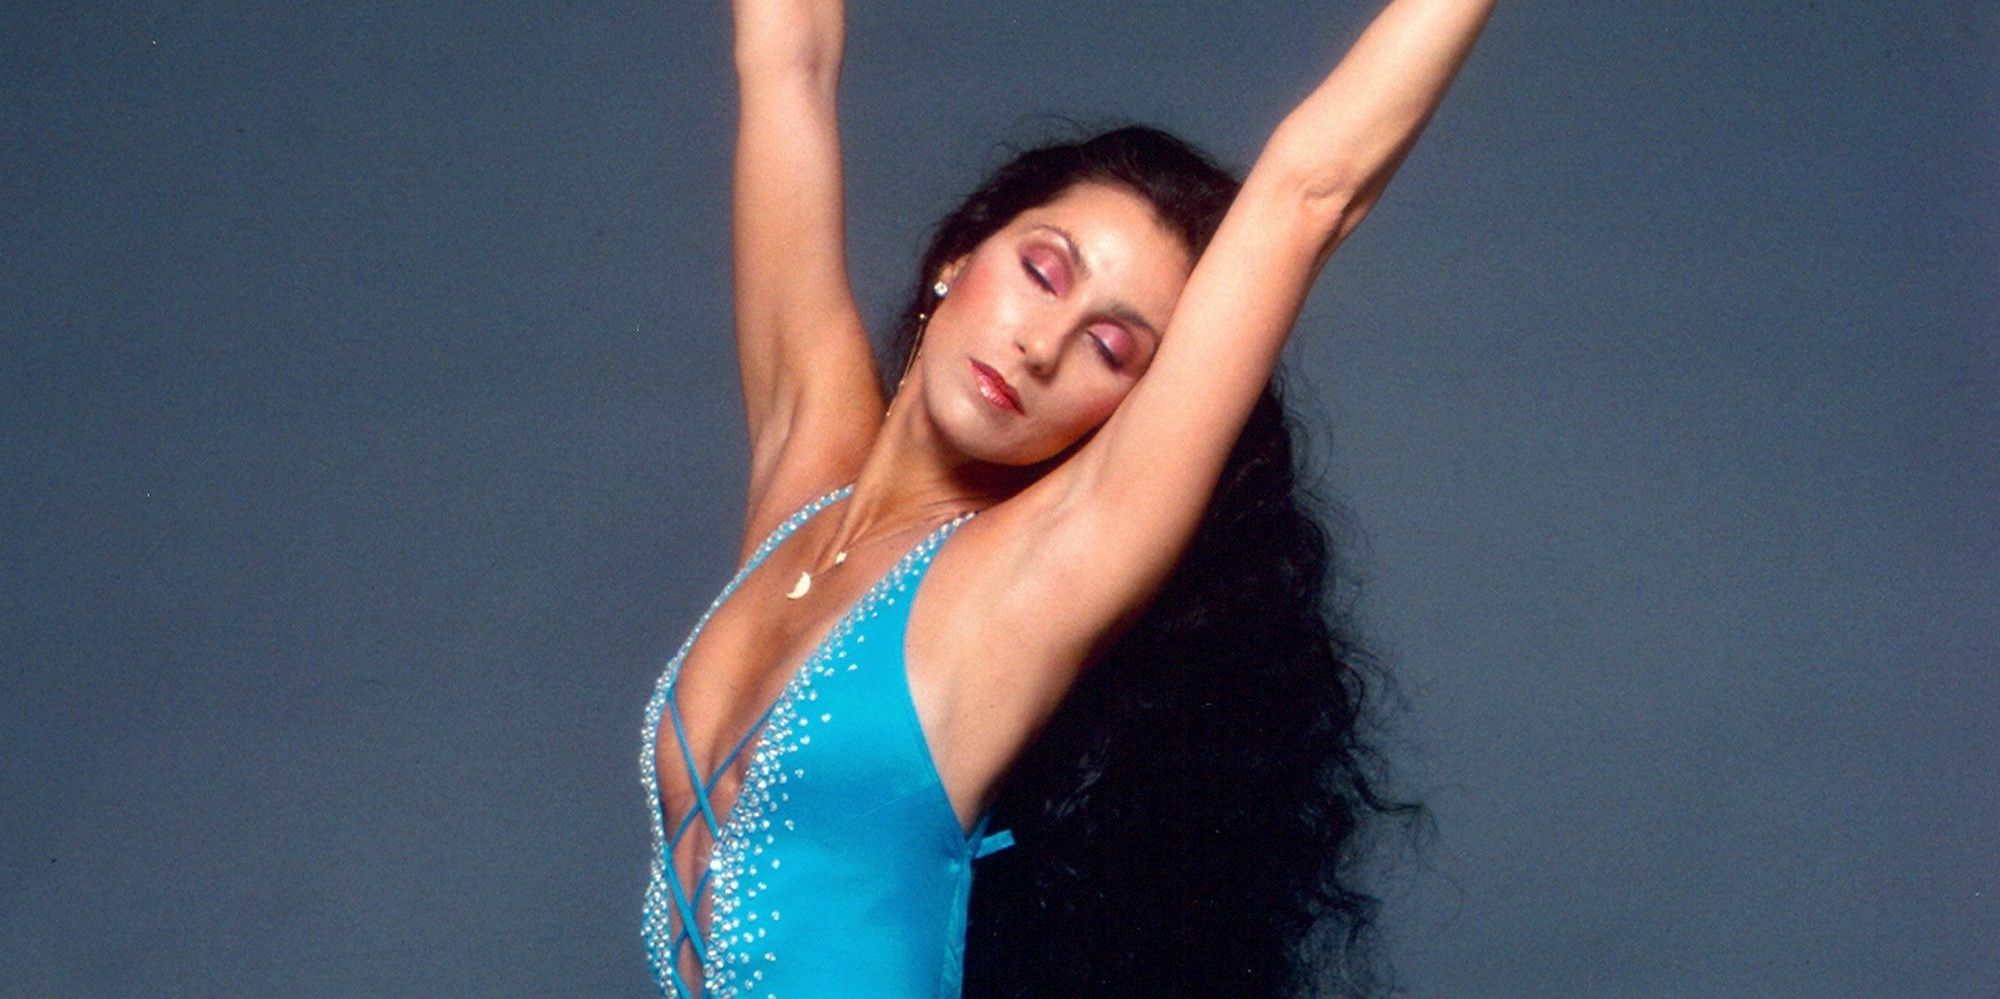 33 Vintage Photos Of Cher S Style In The 70s 80s And 90s